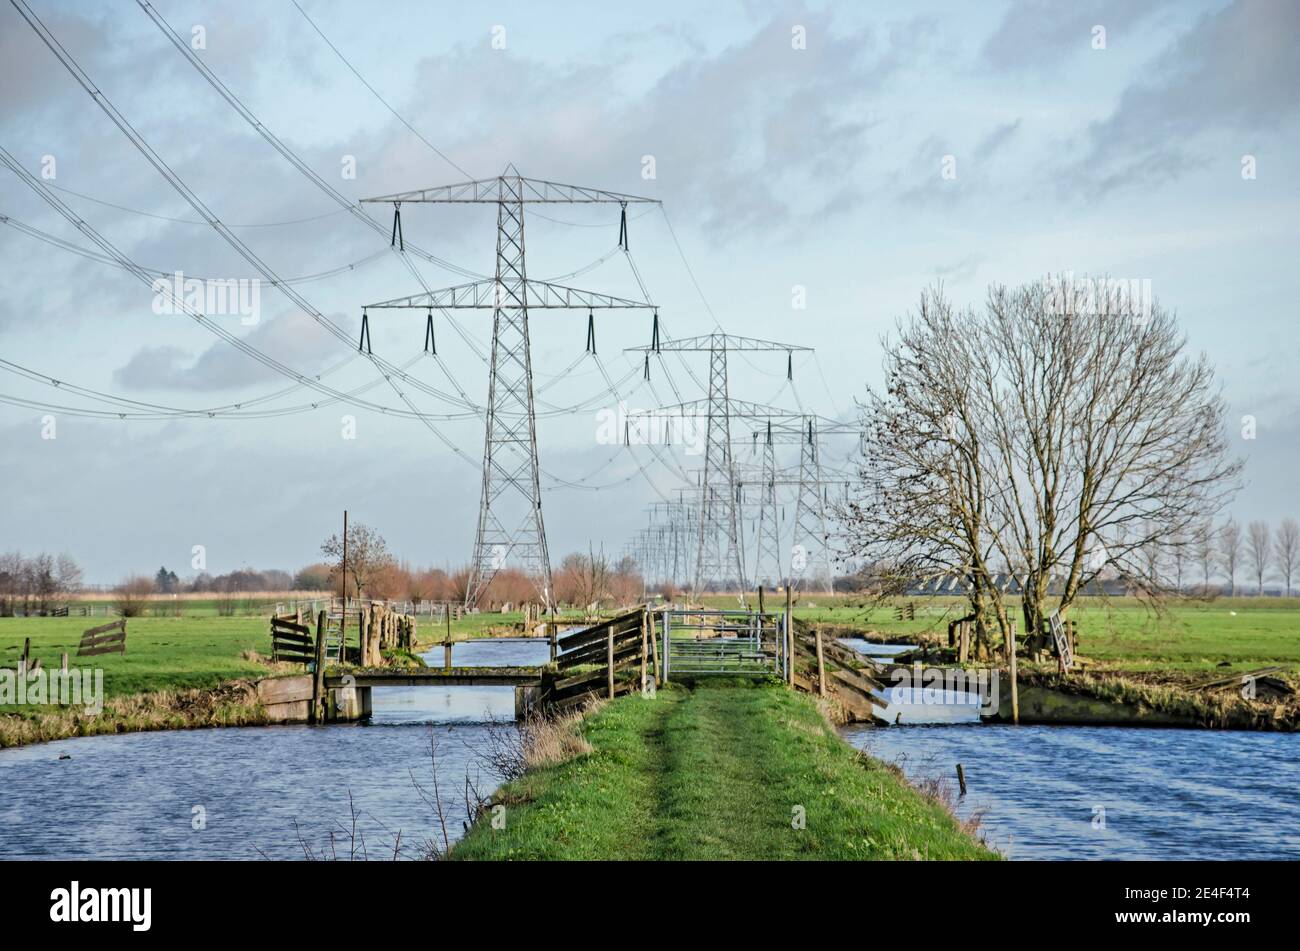 Steinse Tiendweg hiking trail in the polders near Gouda, The Netherlands crossing the trajctory of electricity pylons and power lines Stock Photo